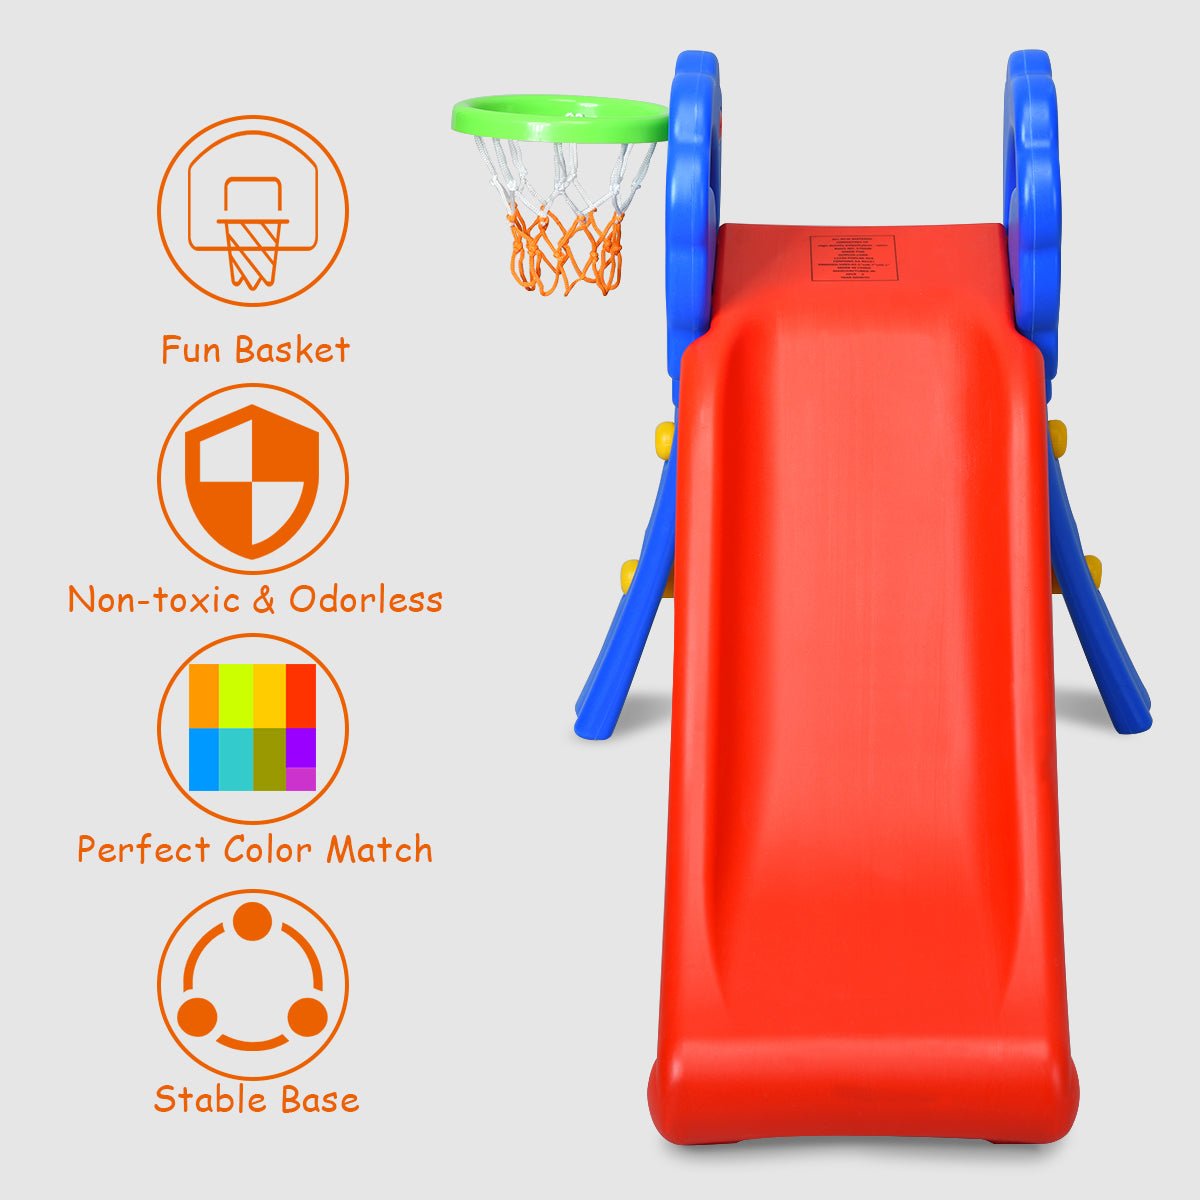 Slide into Fun with the Children's Folding Slide and Hoop